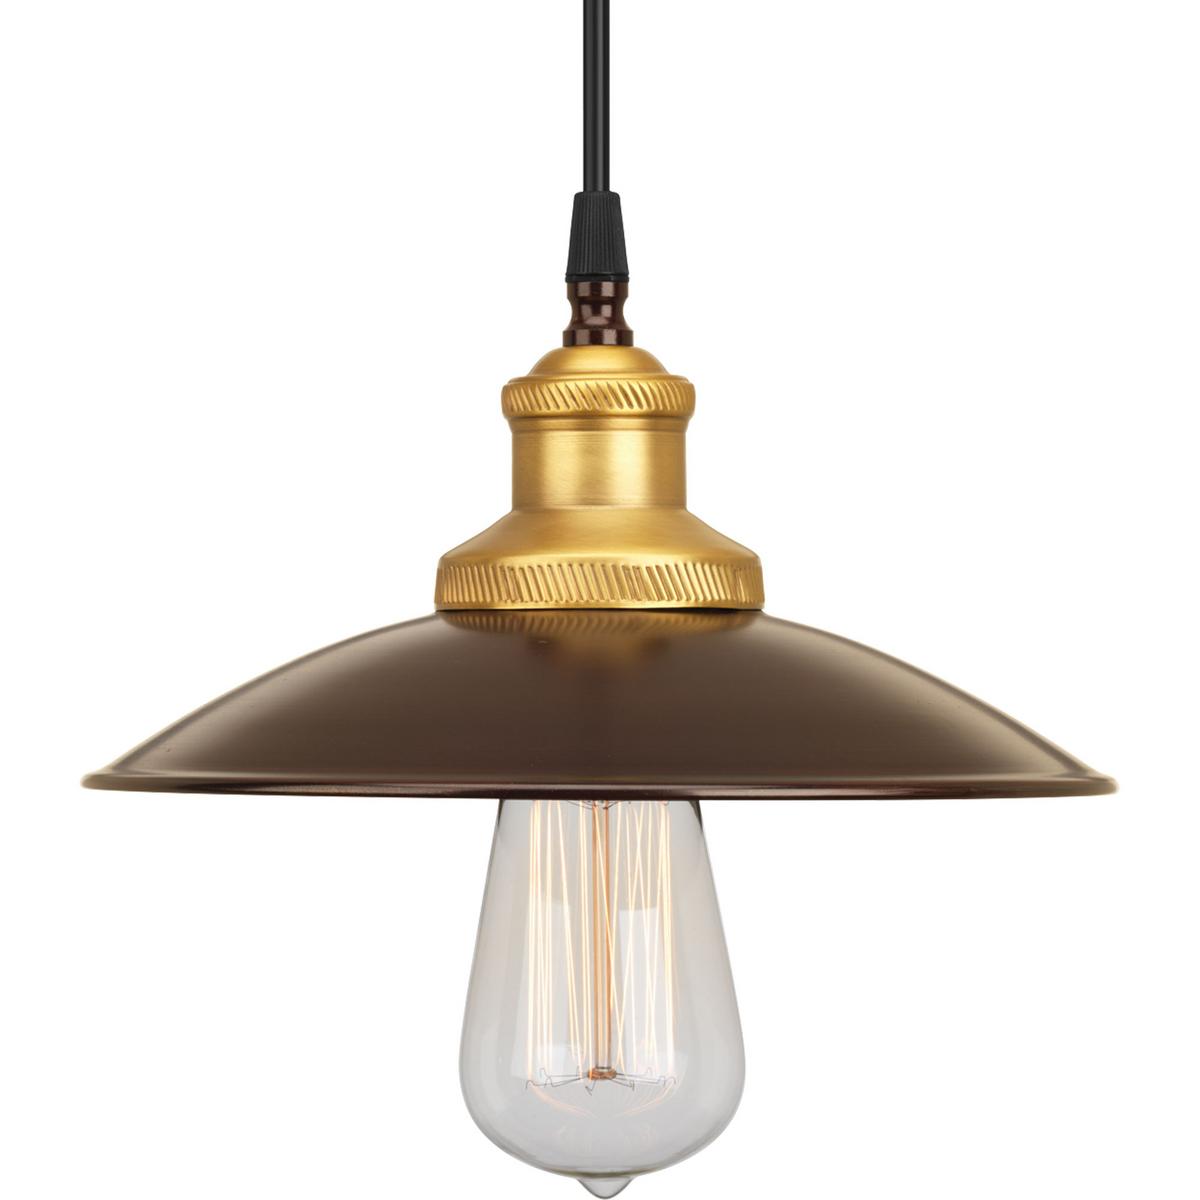 Hubbell P5161-20 Pendants have the power to change a look of a room instantly. Today, they can be seen in bath and vanity areas, kitchens and foyers - and as singles or in groups of two or more. With Archives' pendants and wall sconce, carefully crafted details and specia